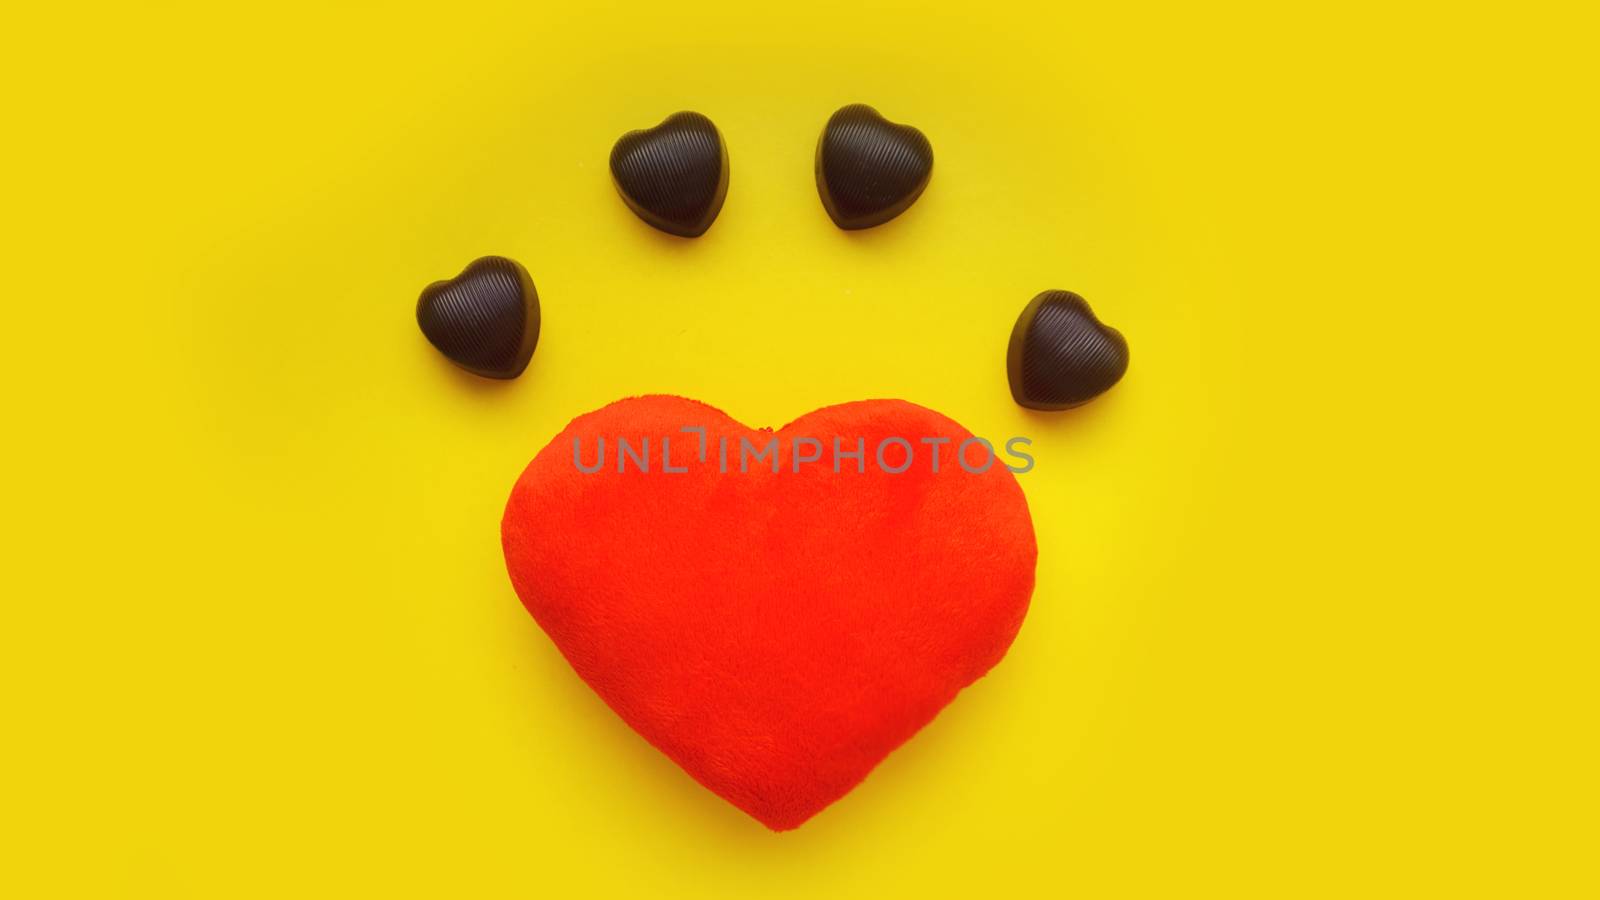 Valentines day background with soft toy heart and chocolates on yellow background. Top view. For banner, cards design